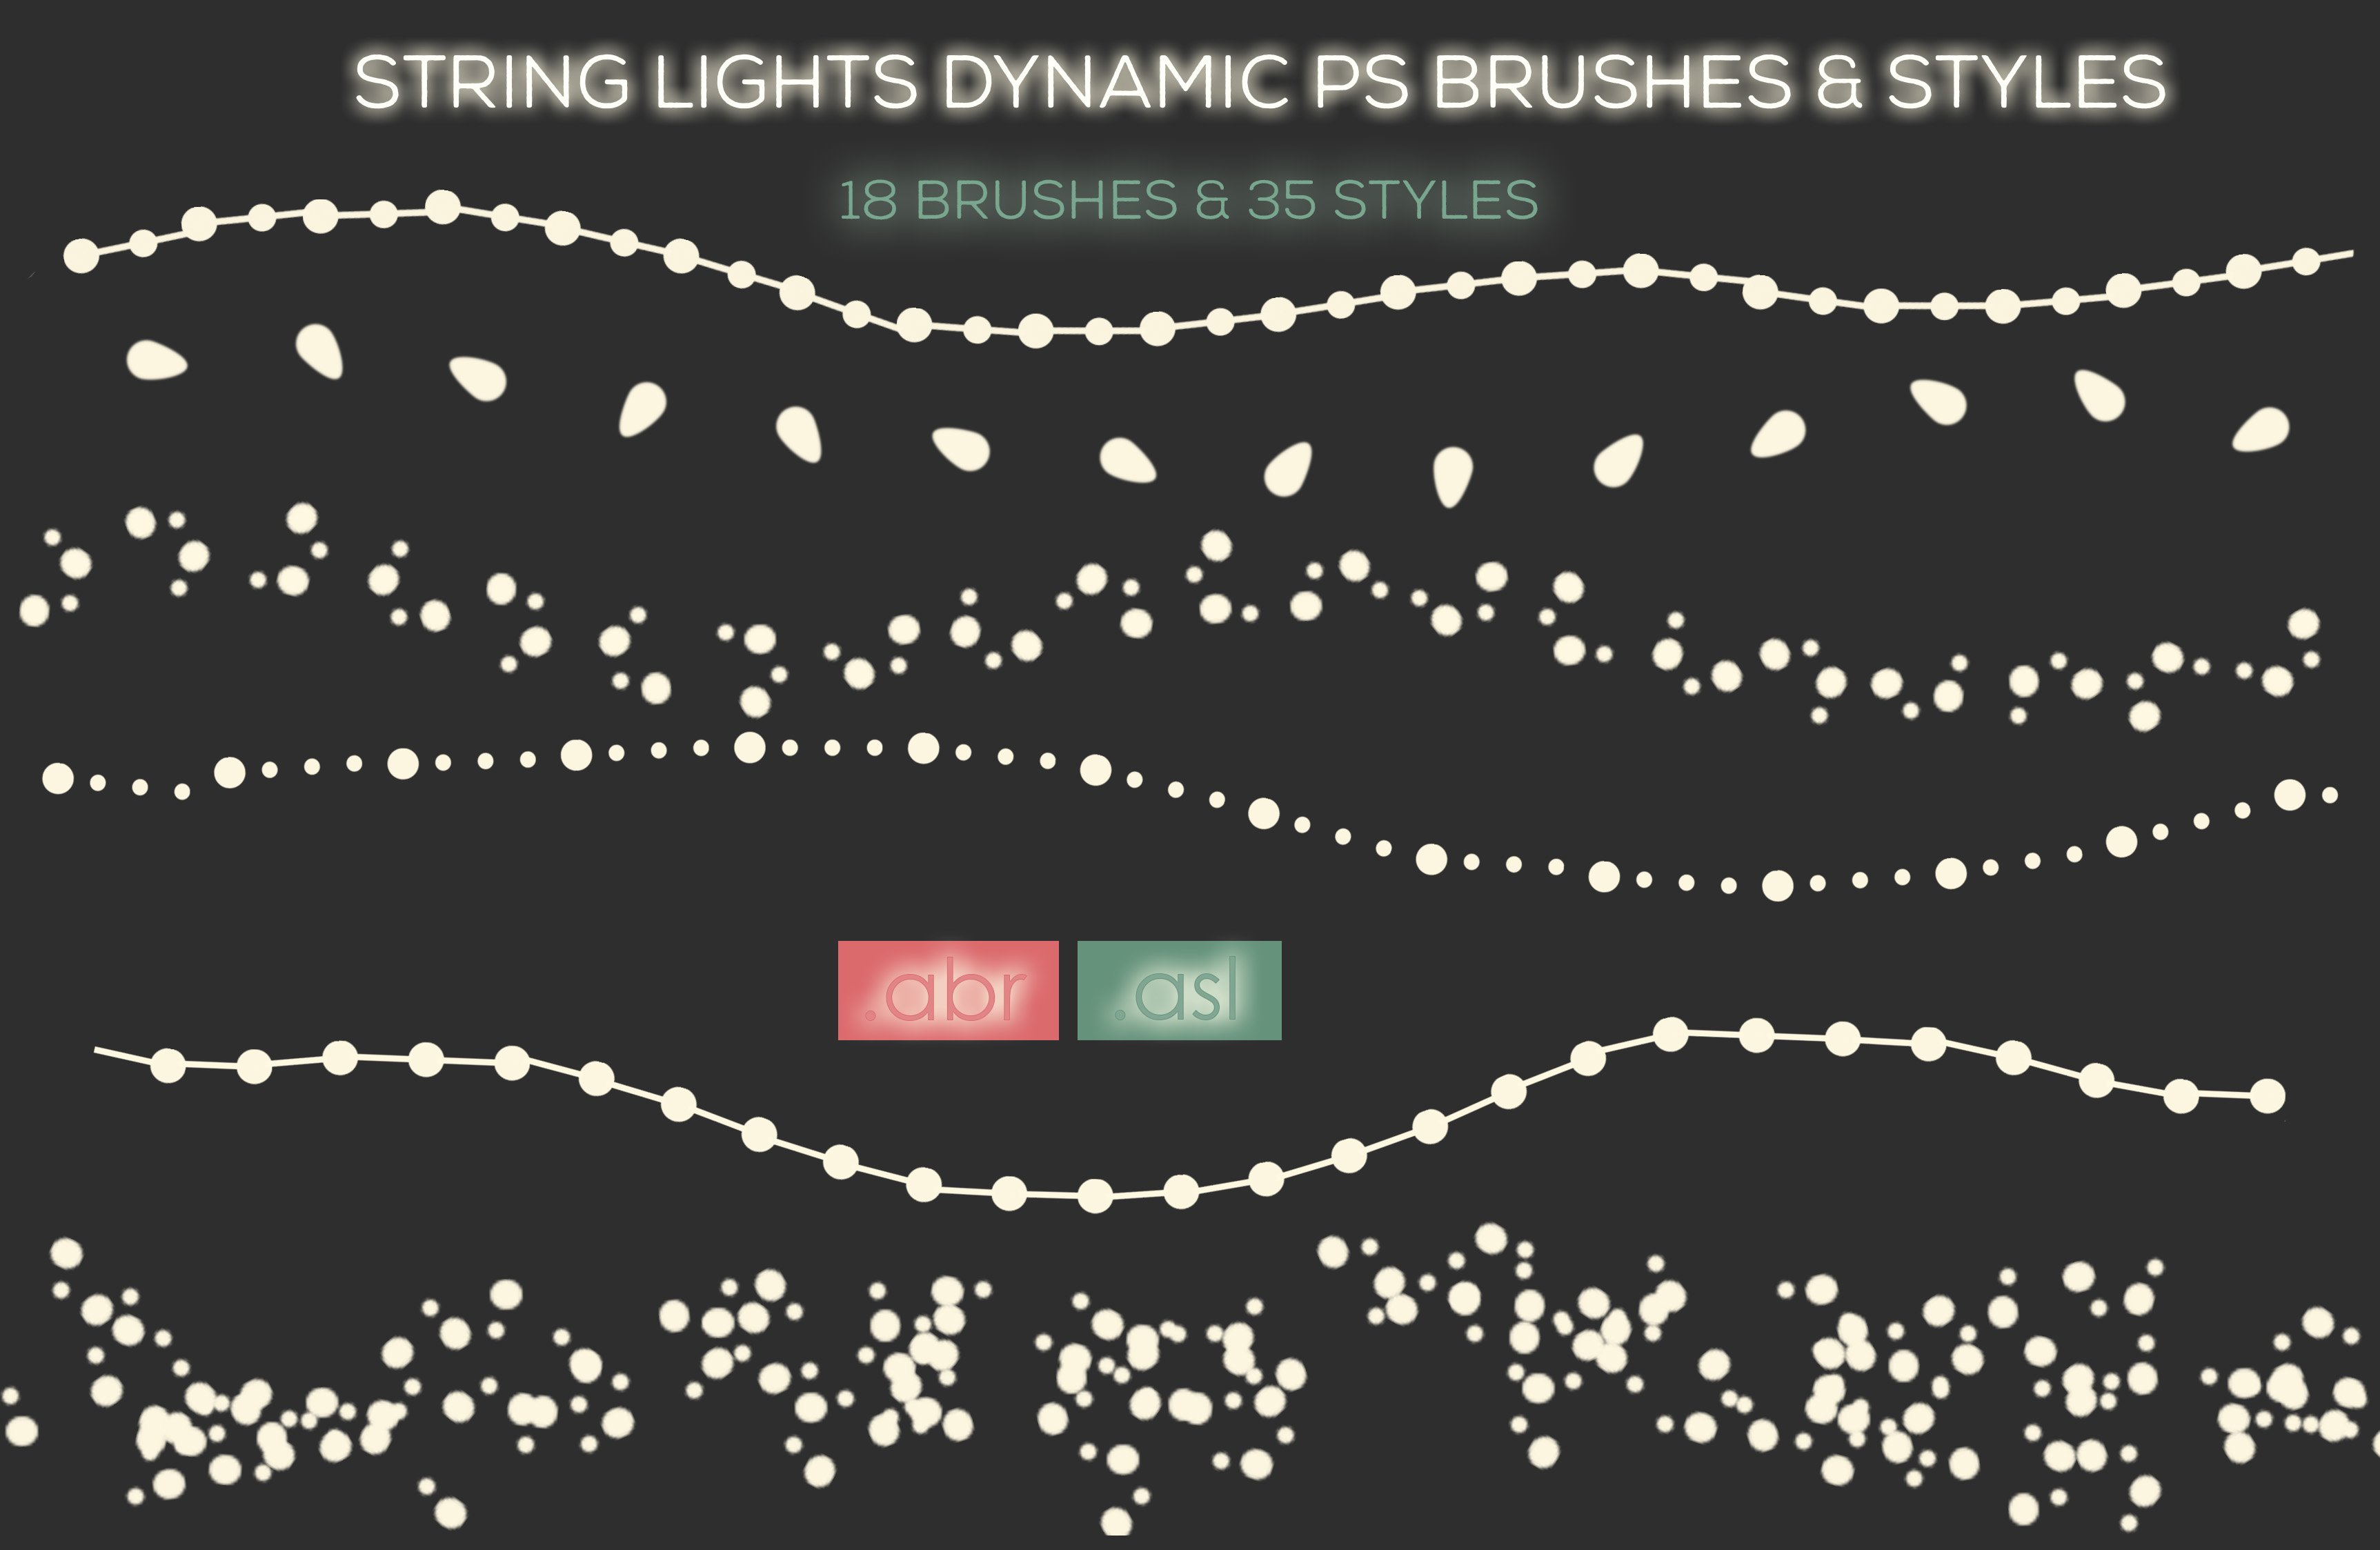 PS String Lights Brushes & Stylespreview image.